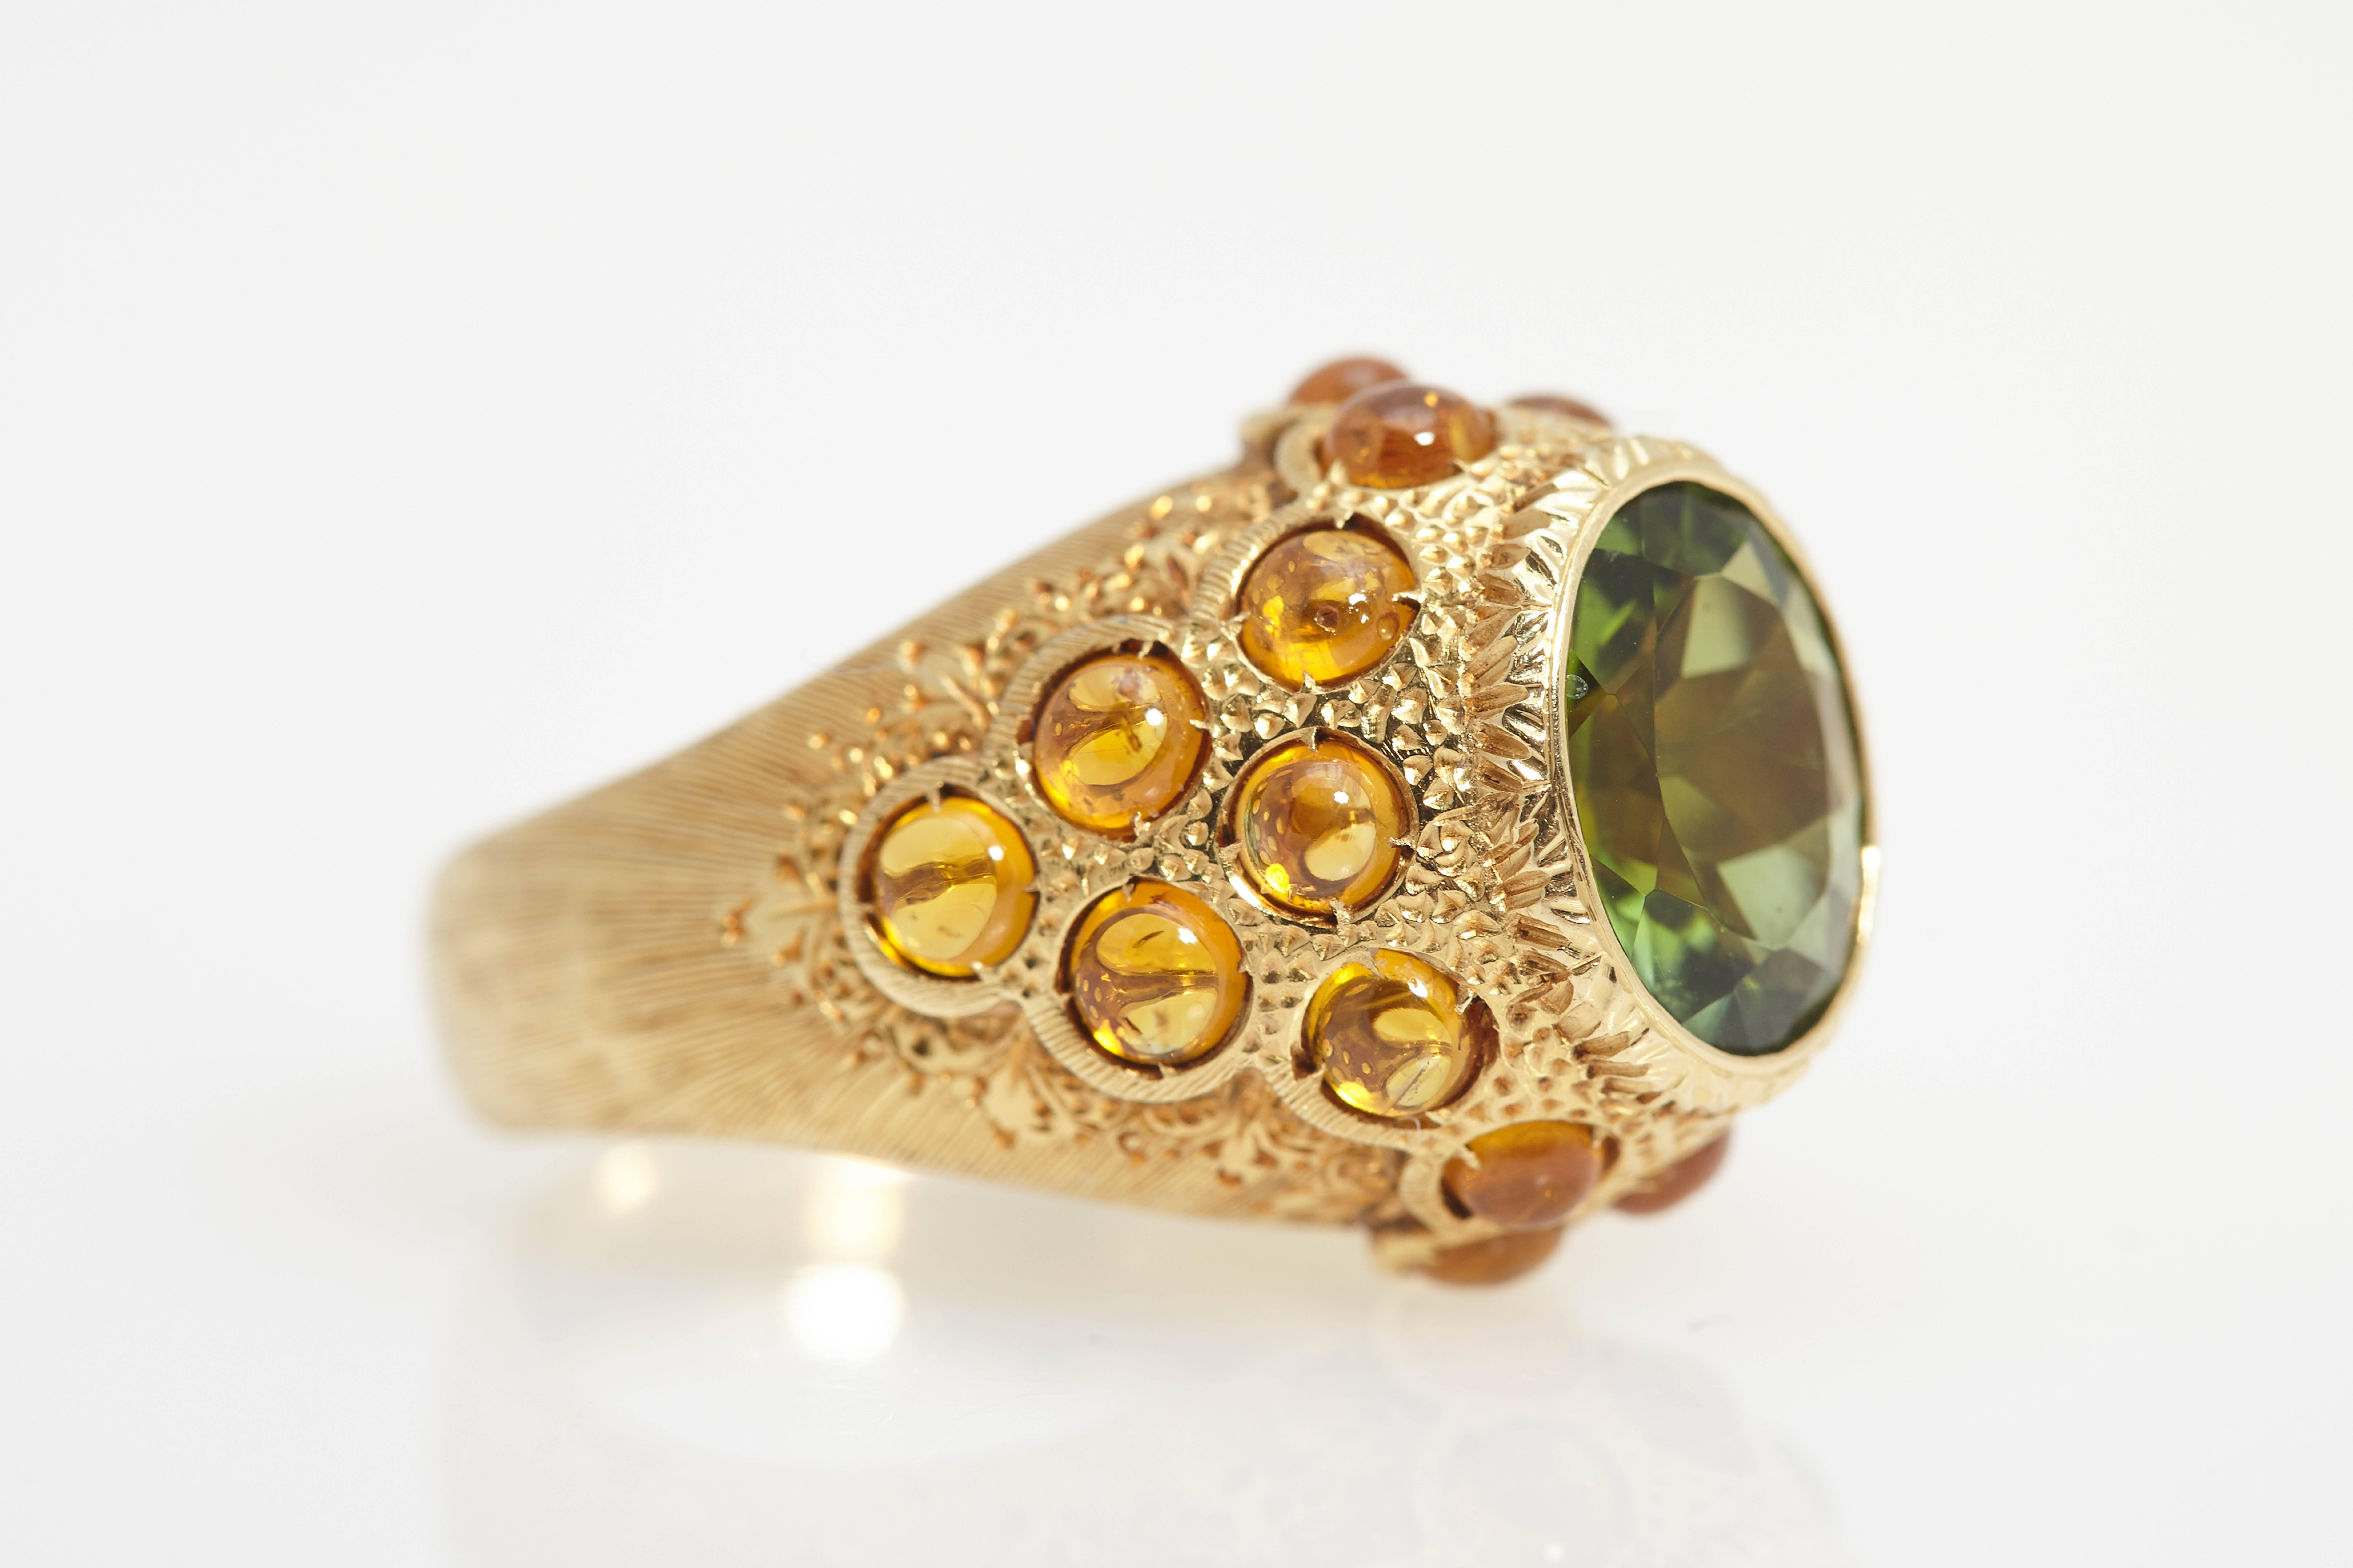 A sophisticated 18kt yellow gold ring showcasing a peridot, highlighted by  citrines by Buccellati. Made in Italy, circa 1975.